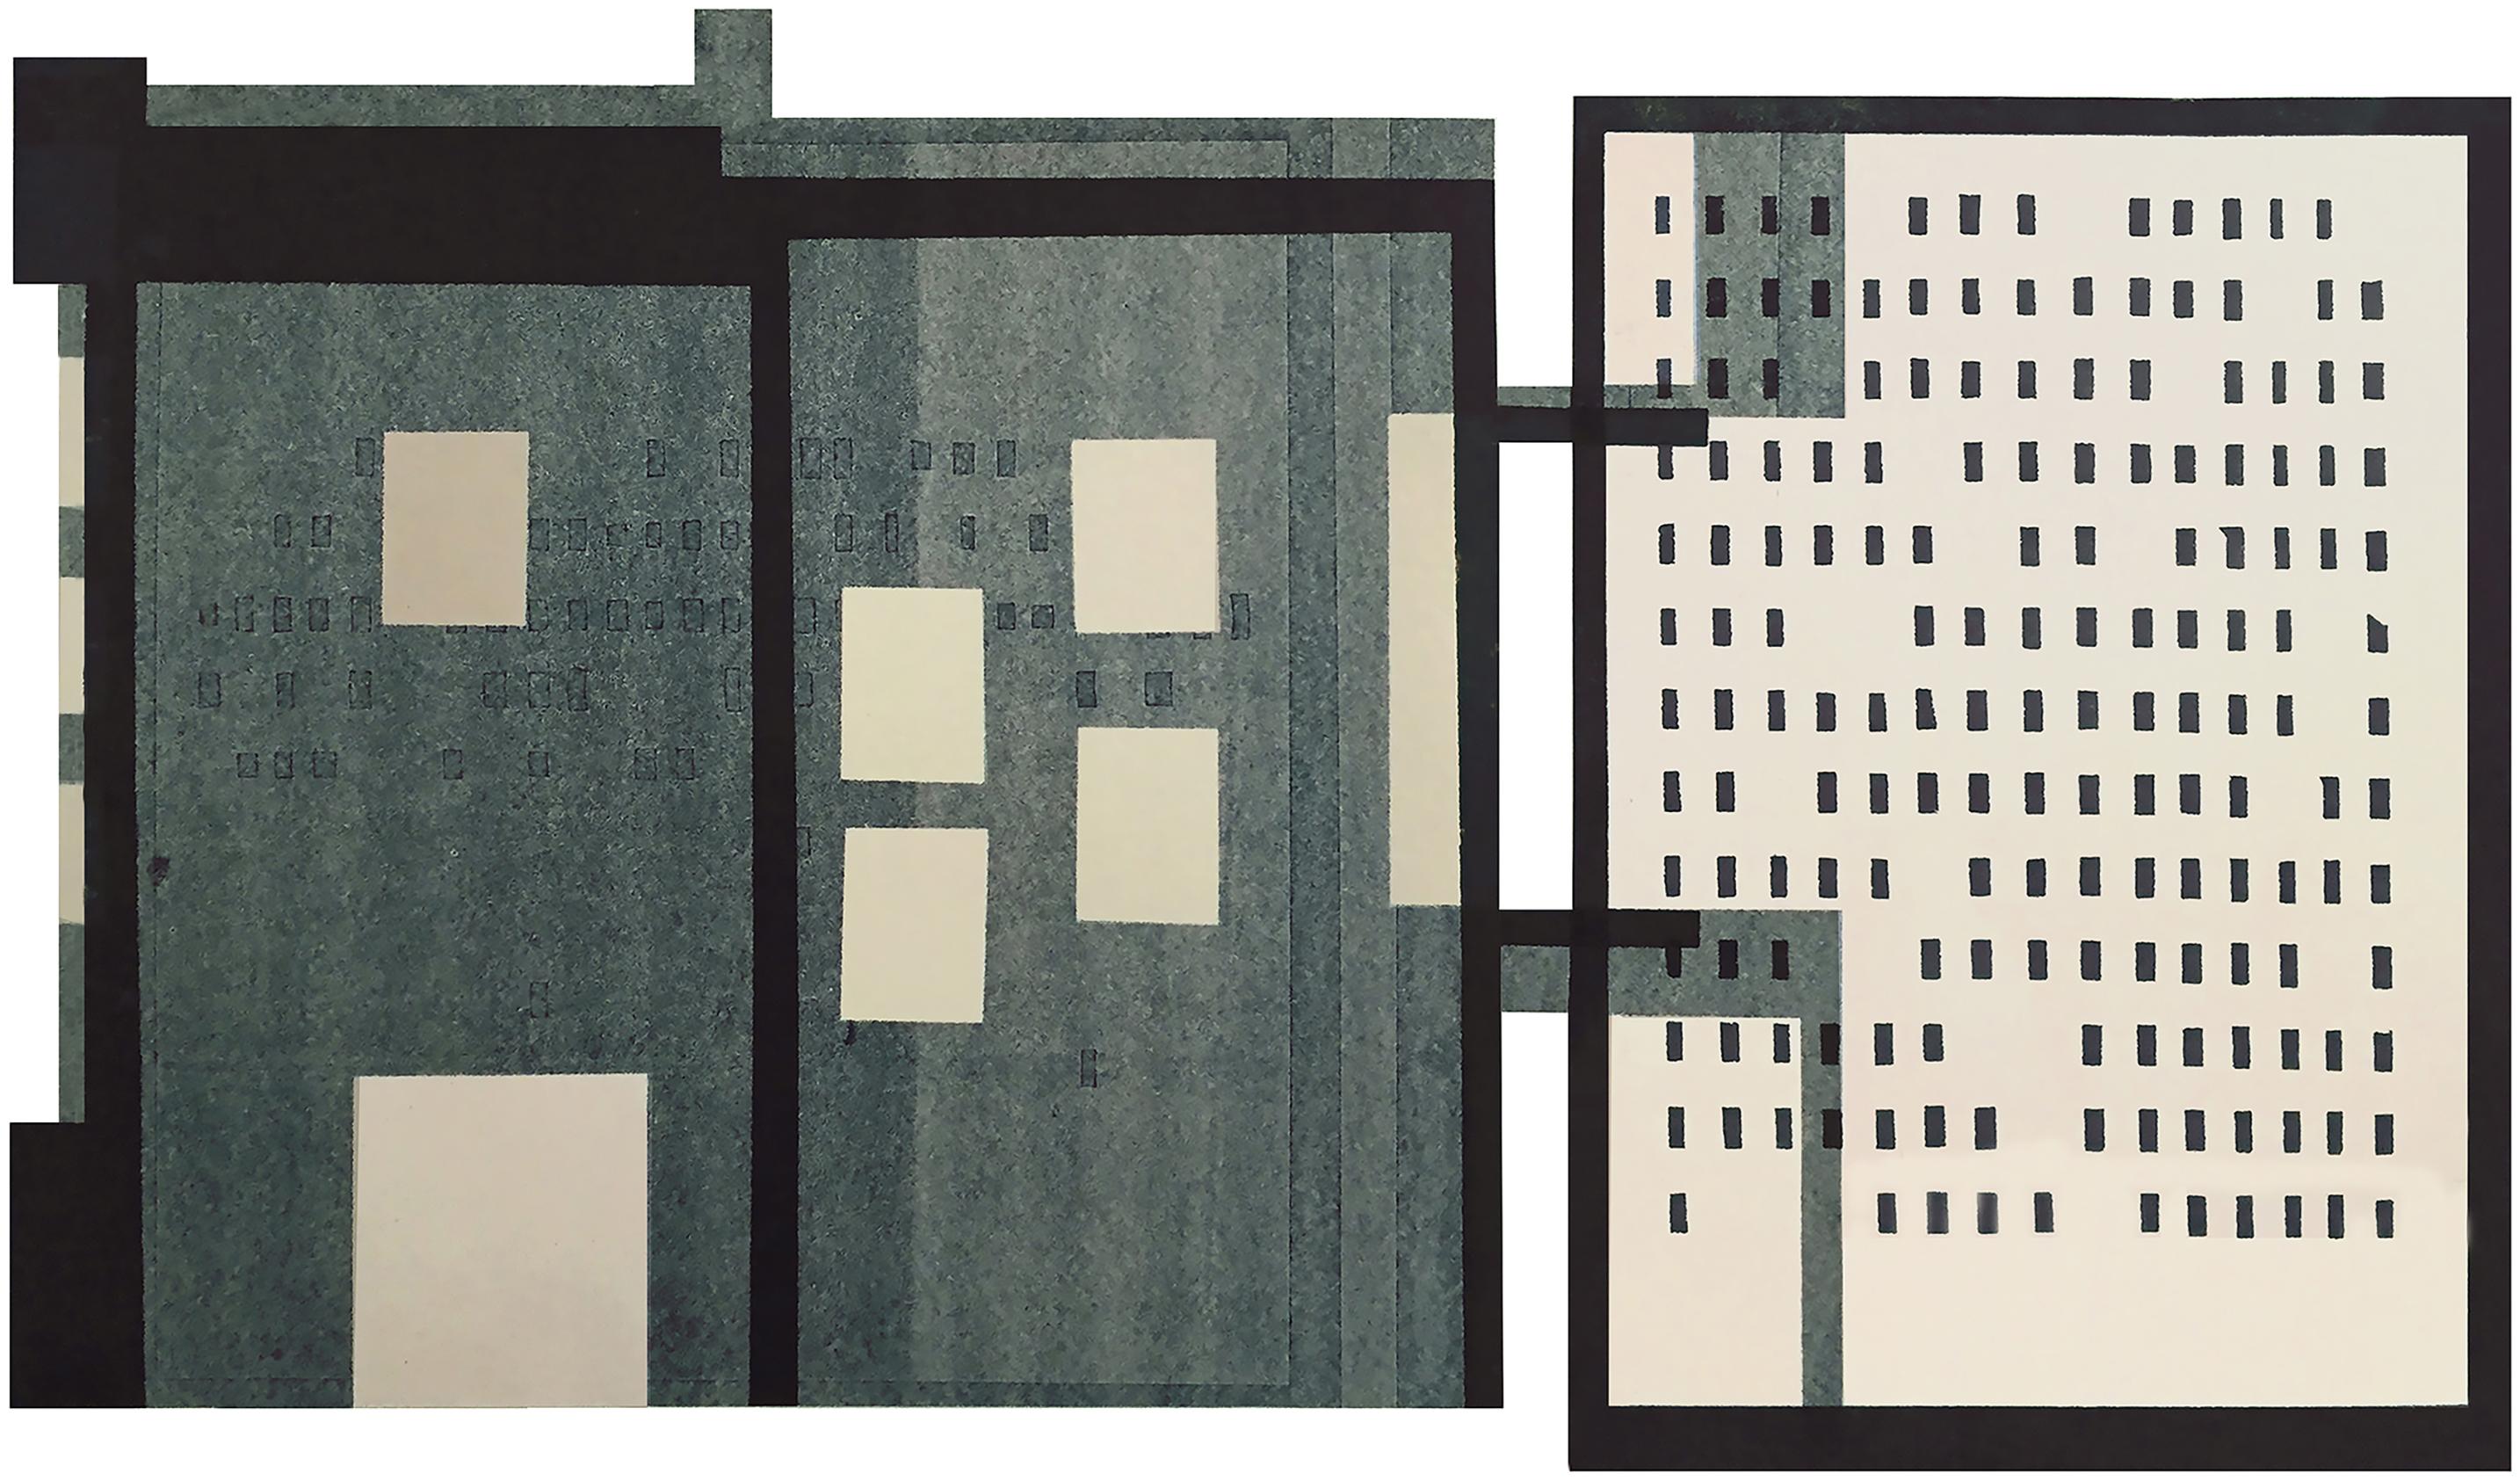 In-Between: modernist, urban architectural monoprint & collage in gray & blue - Contemporary Print by Agathe Bouton